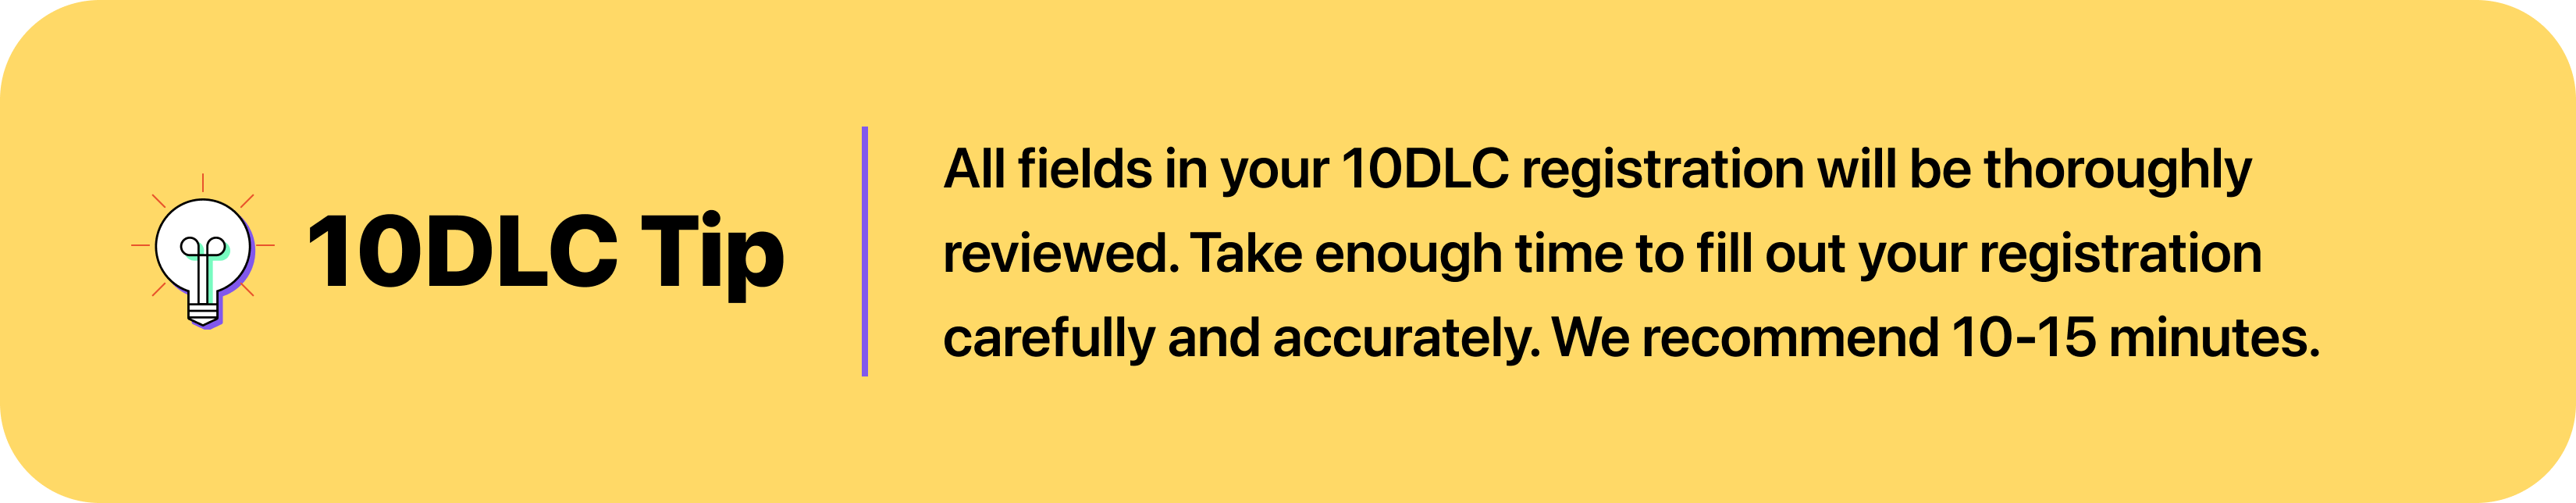 All fields in your 10DLC registration will be thoroughly reviewed. Take enough time to fill out your registration carefully and accurately. We recommend 10-15 minutes.